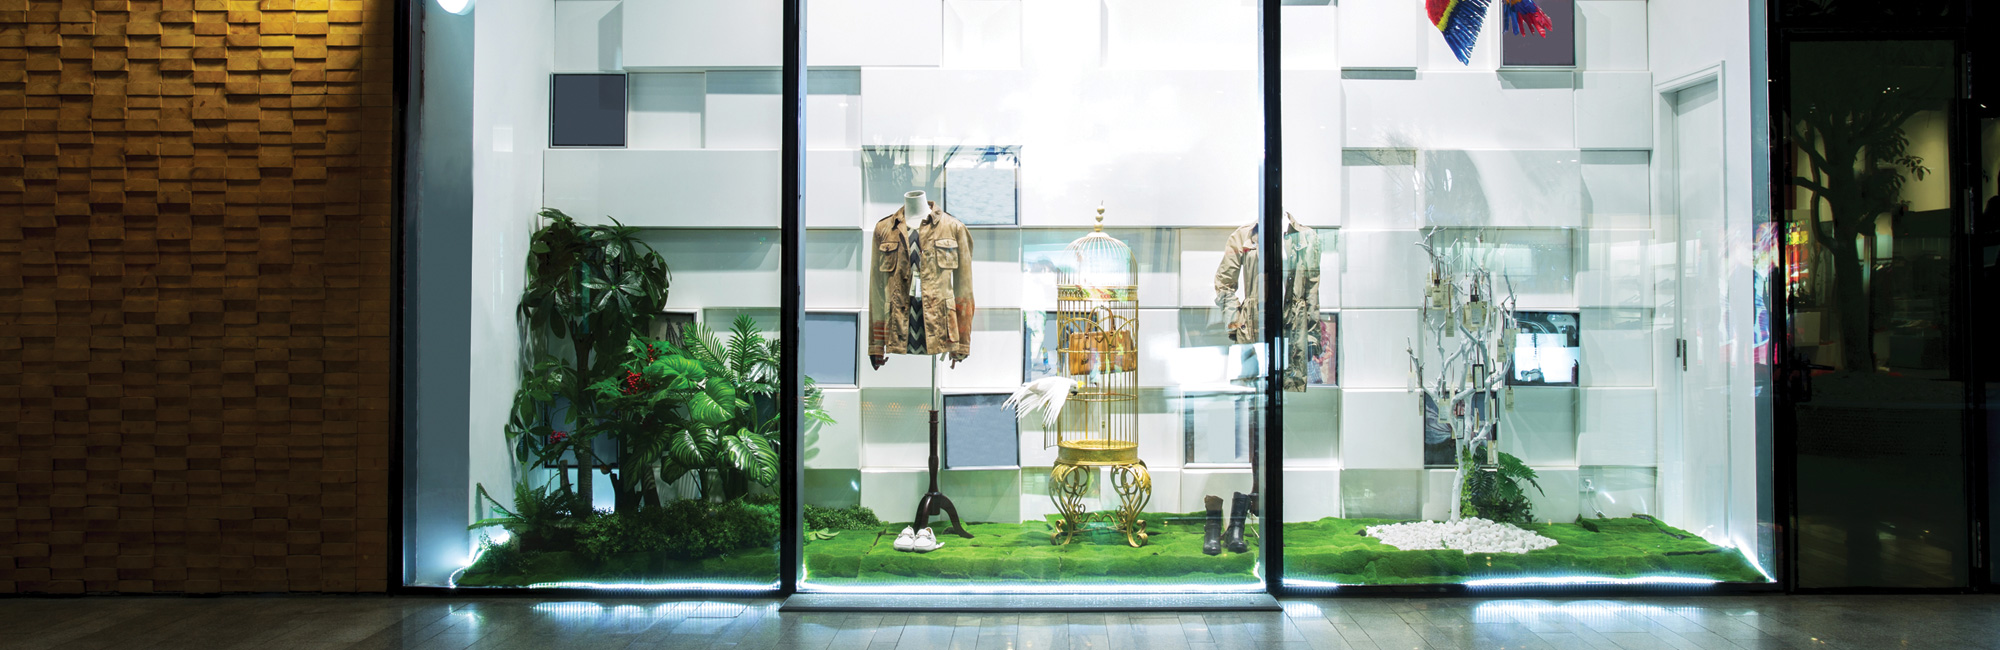 In-Store Display Ideas for Your Retail Space